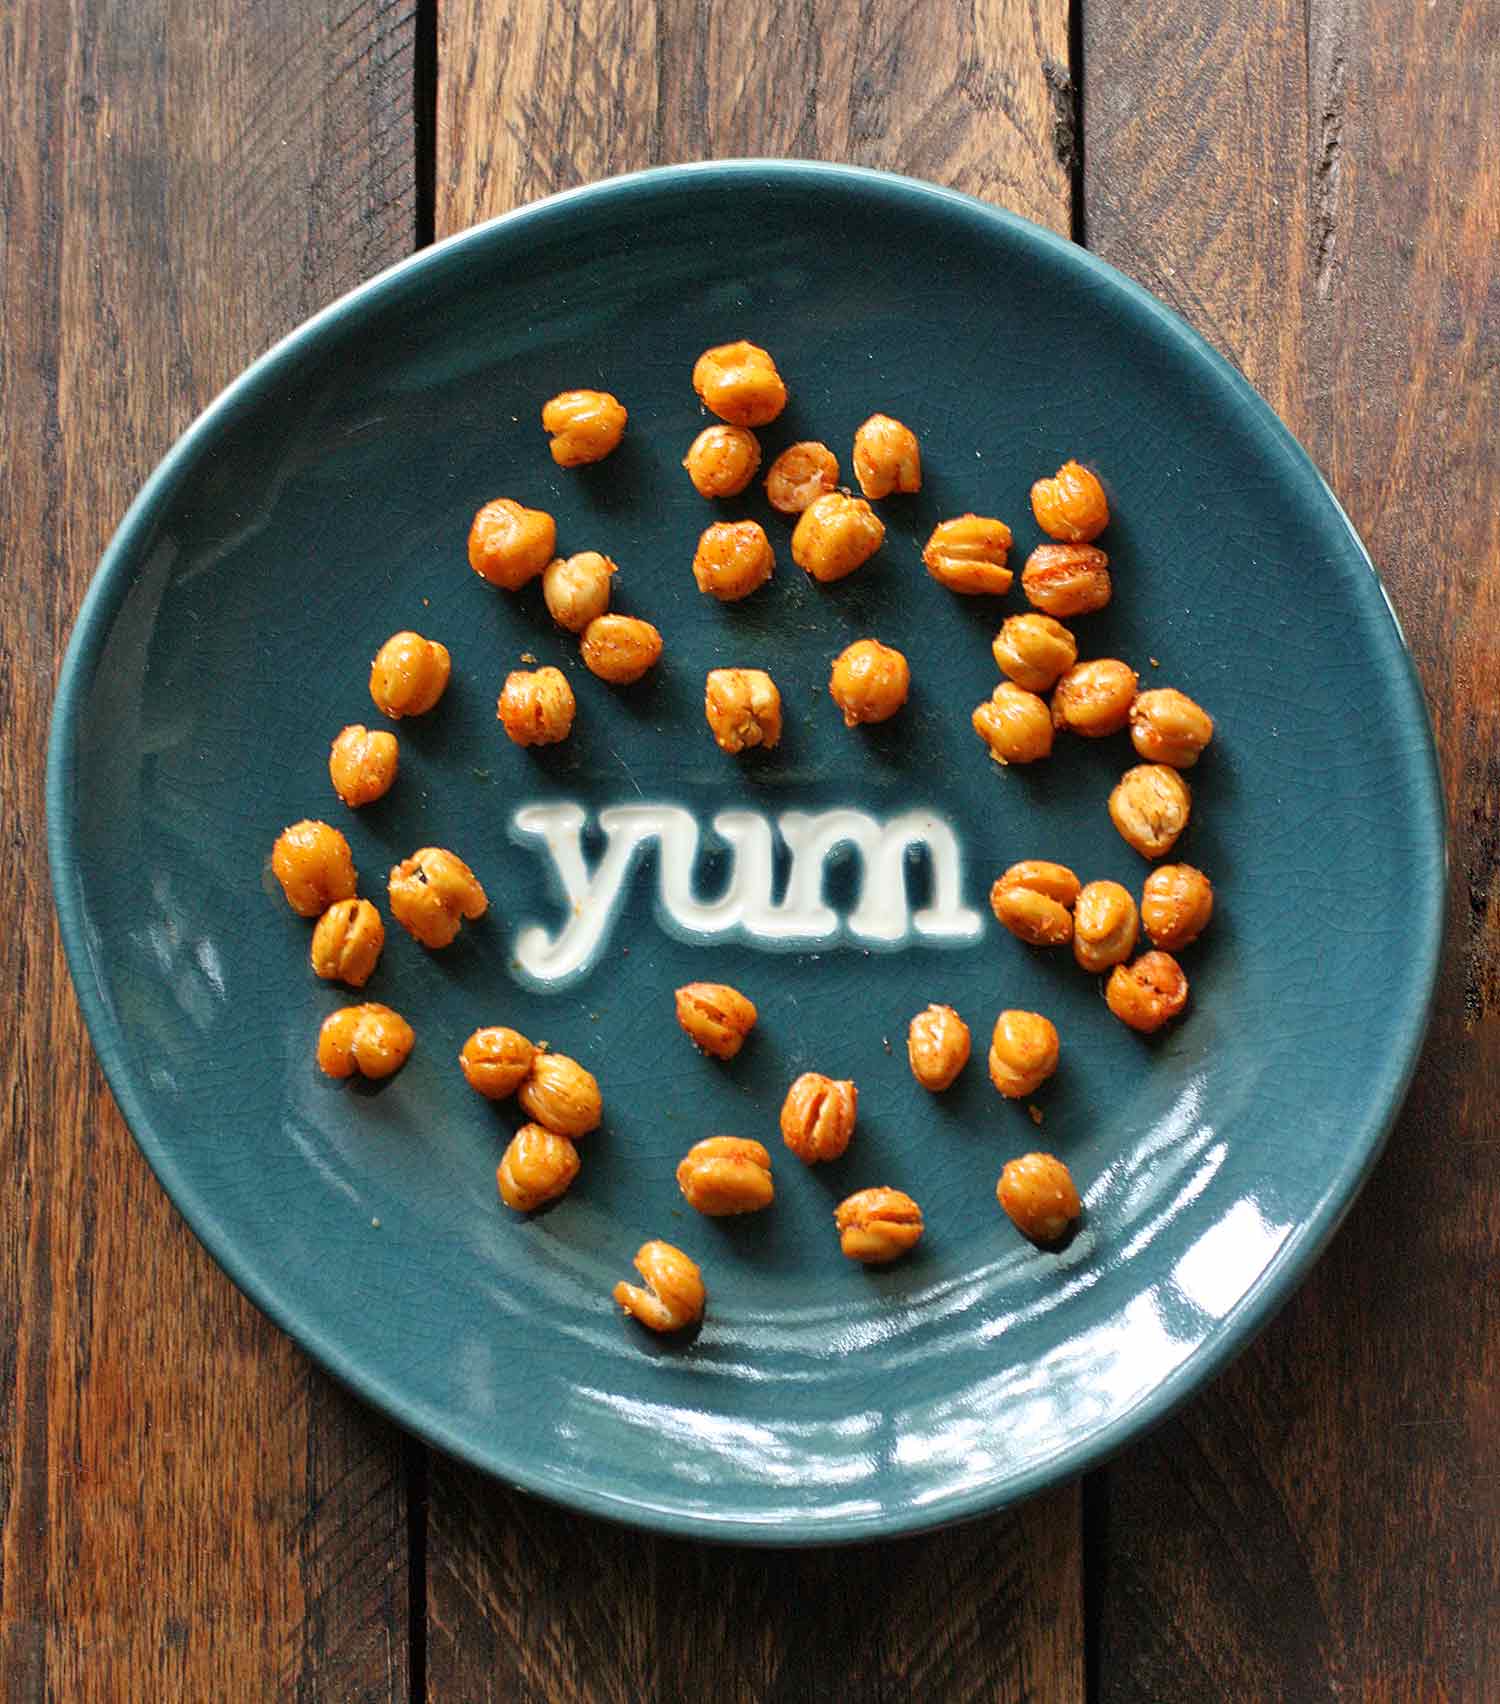 Oven Roasted Chickpeas on a blue plate that says Yum in the center.